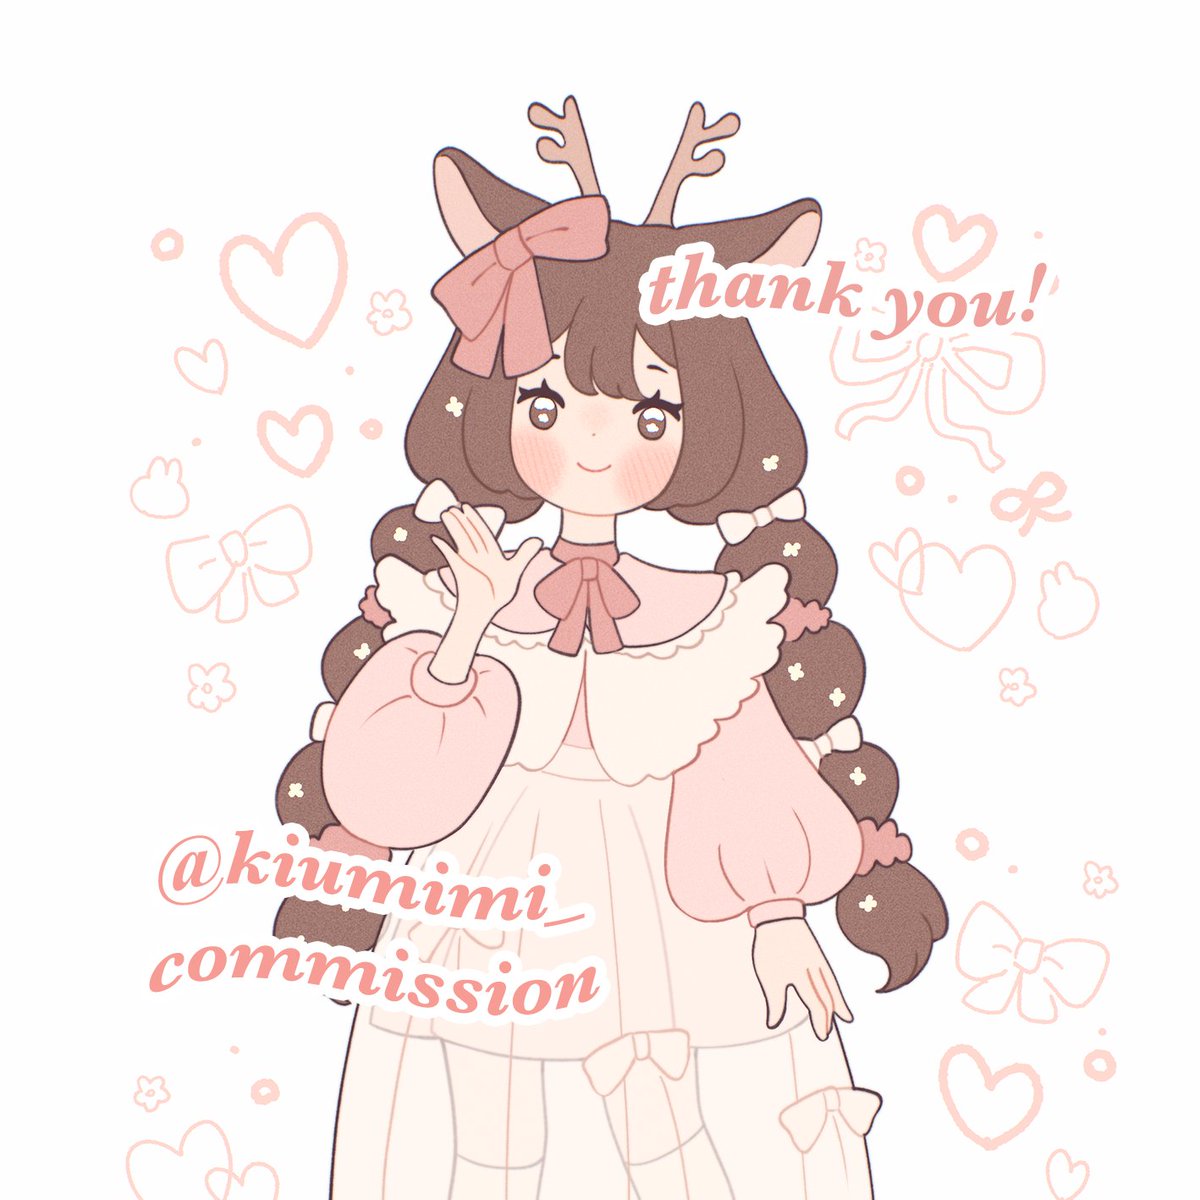 commissions that I did last month~  ヾ꒰ྀི *ˊᵕˋ ꒱ྀིノ 🤍 thank you for your support!!